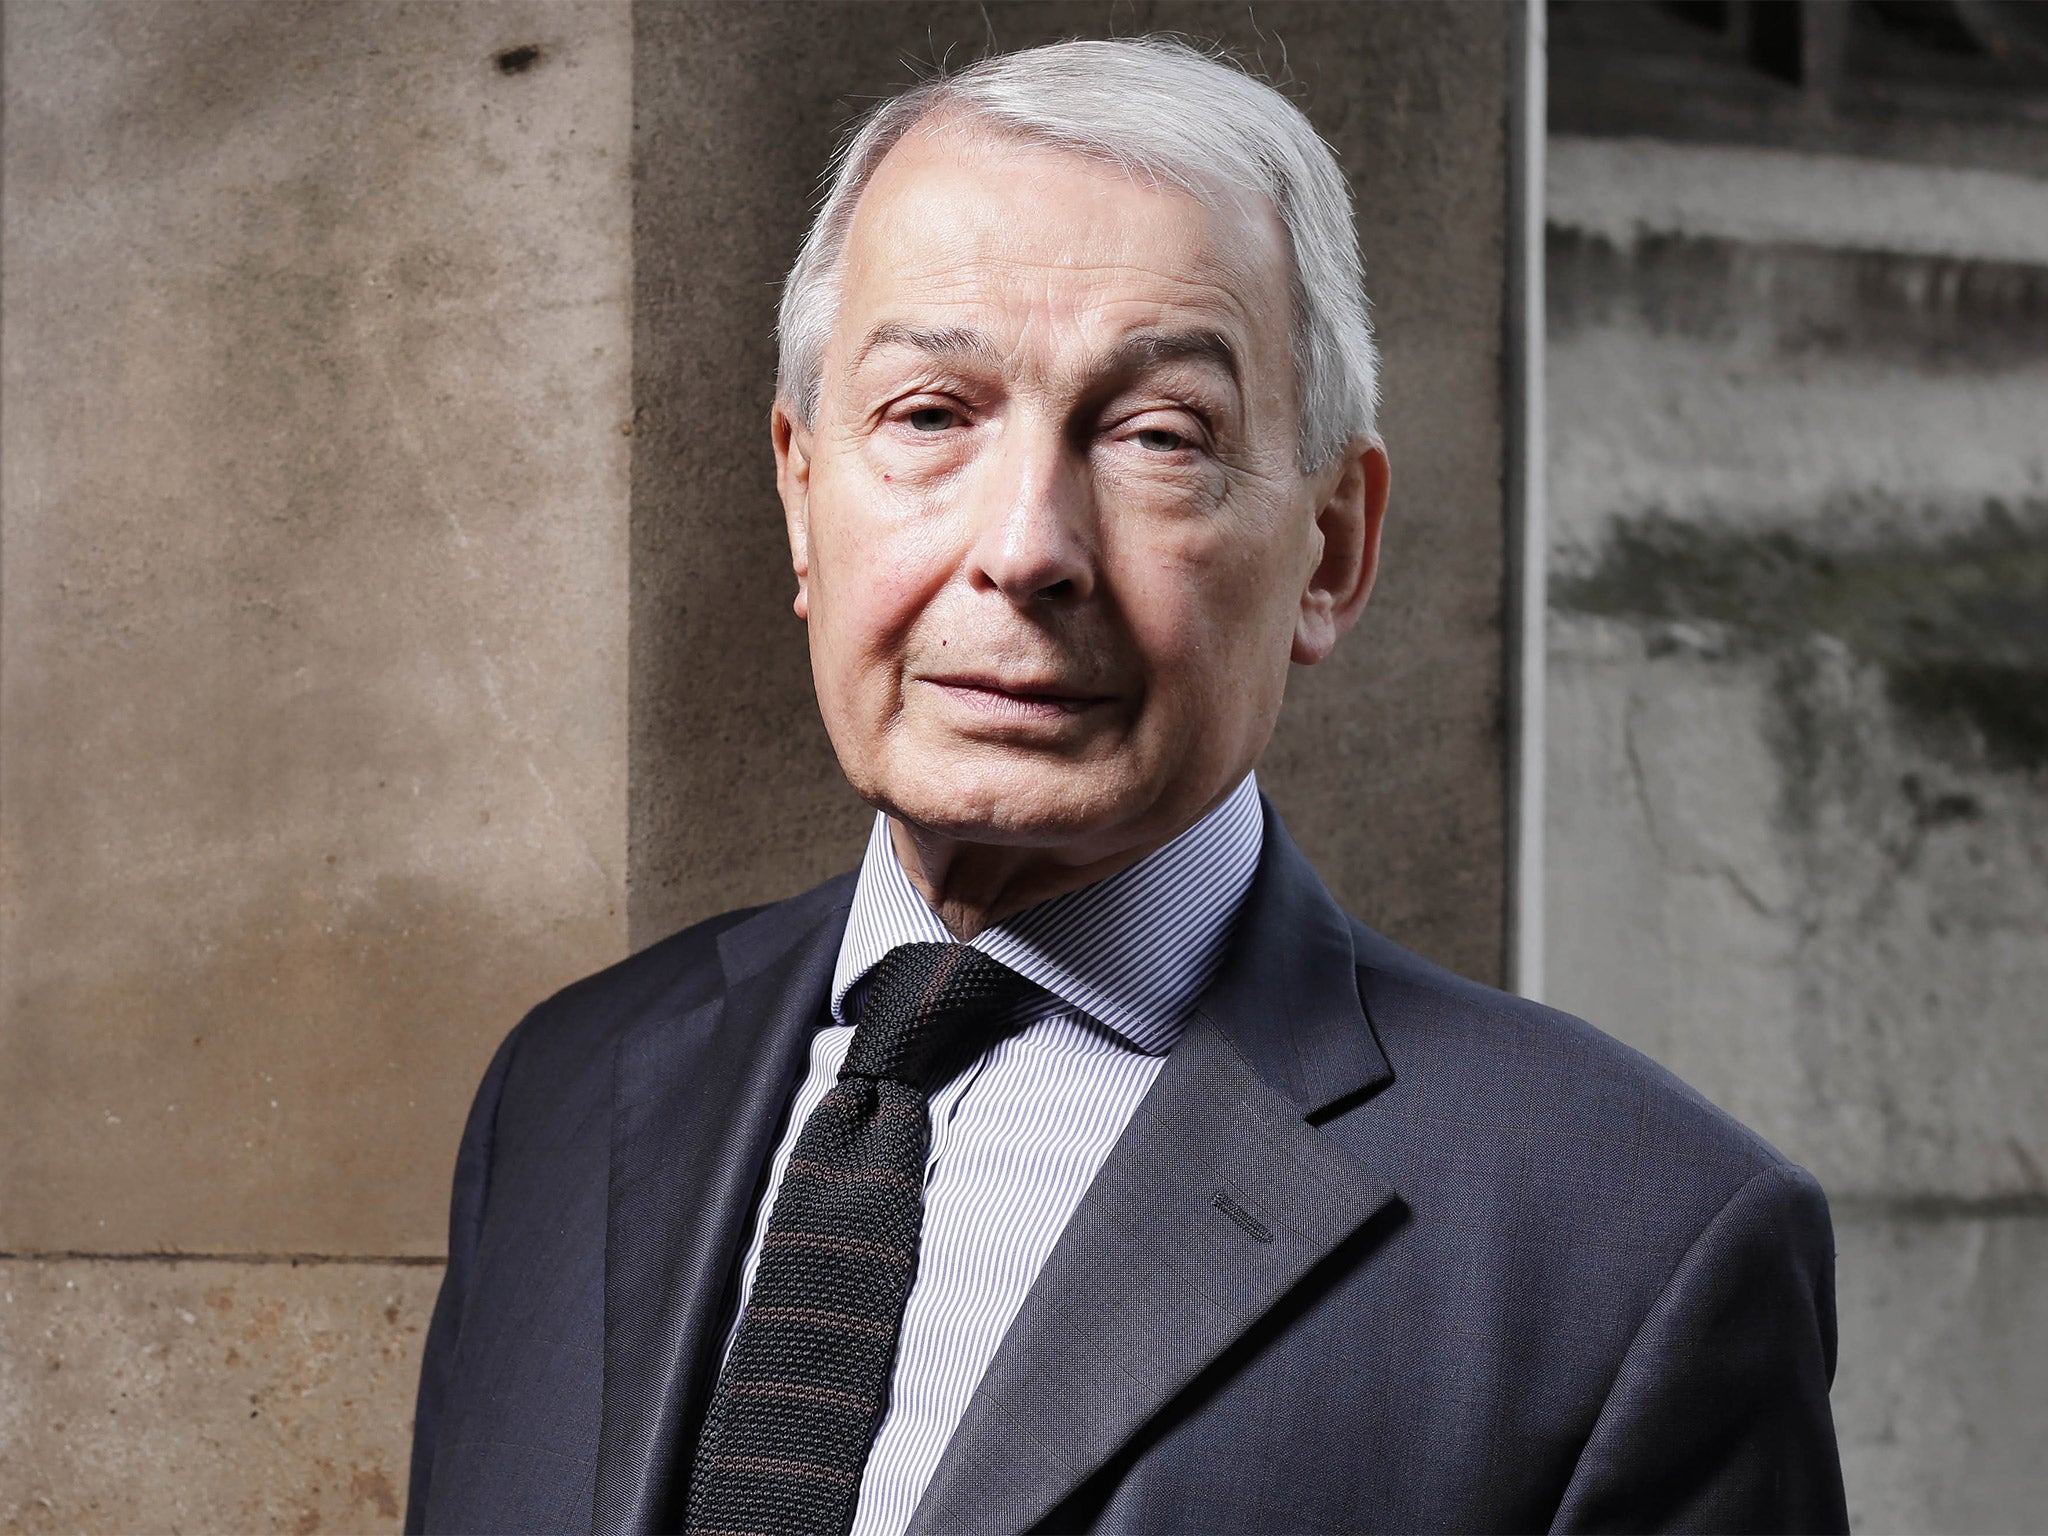 Labour MP Frank Field said it was clear that Jeremy Corbyn was 'the party leader in the country'